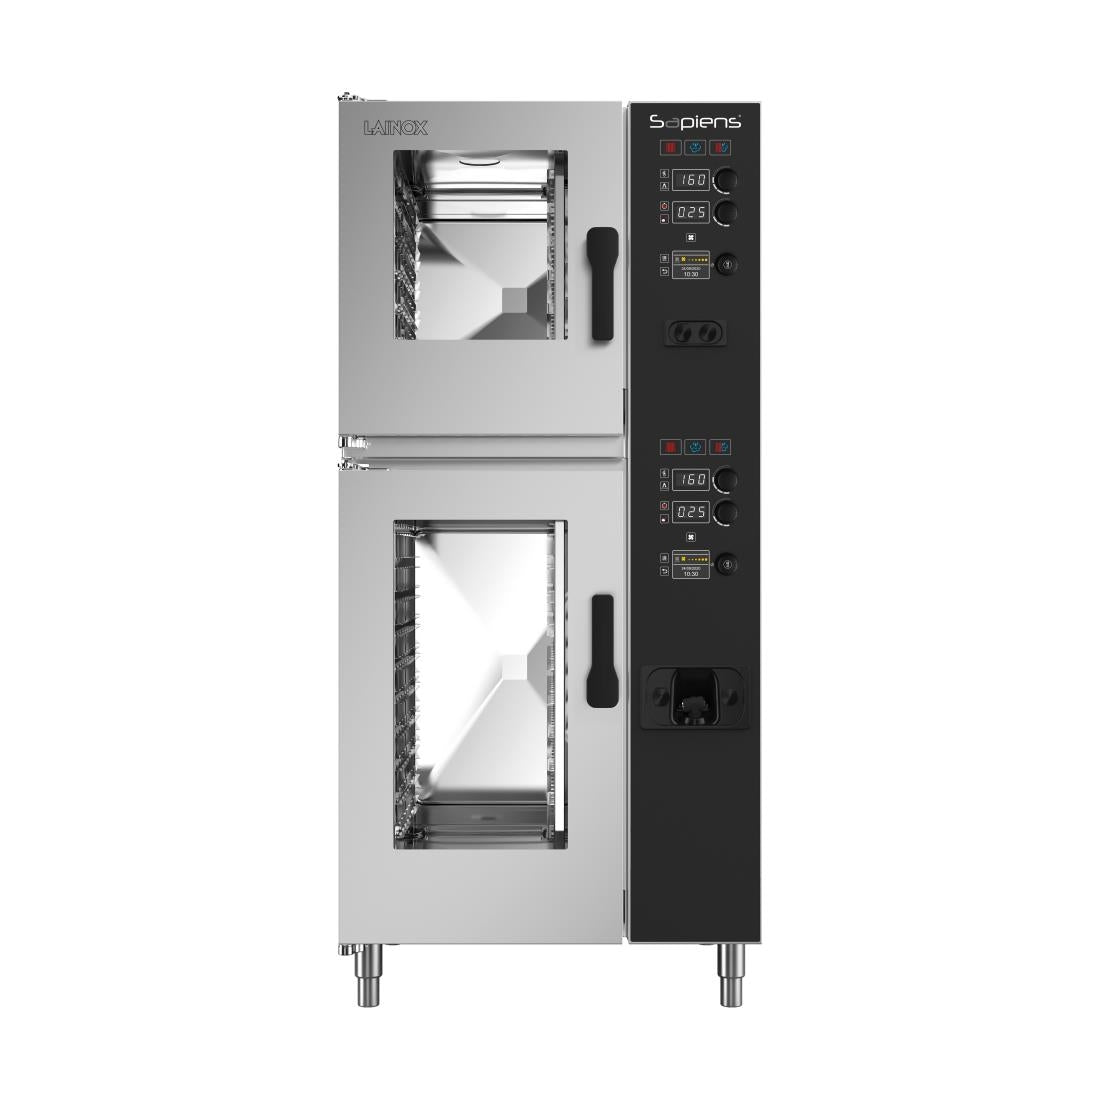 HP577 Lainox Sapiens Boosted Gas Touch Screen Combi Oven SAG161BS 16X1/1GN JD Catering Equipment Solutions Ltd